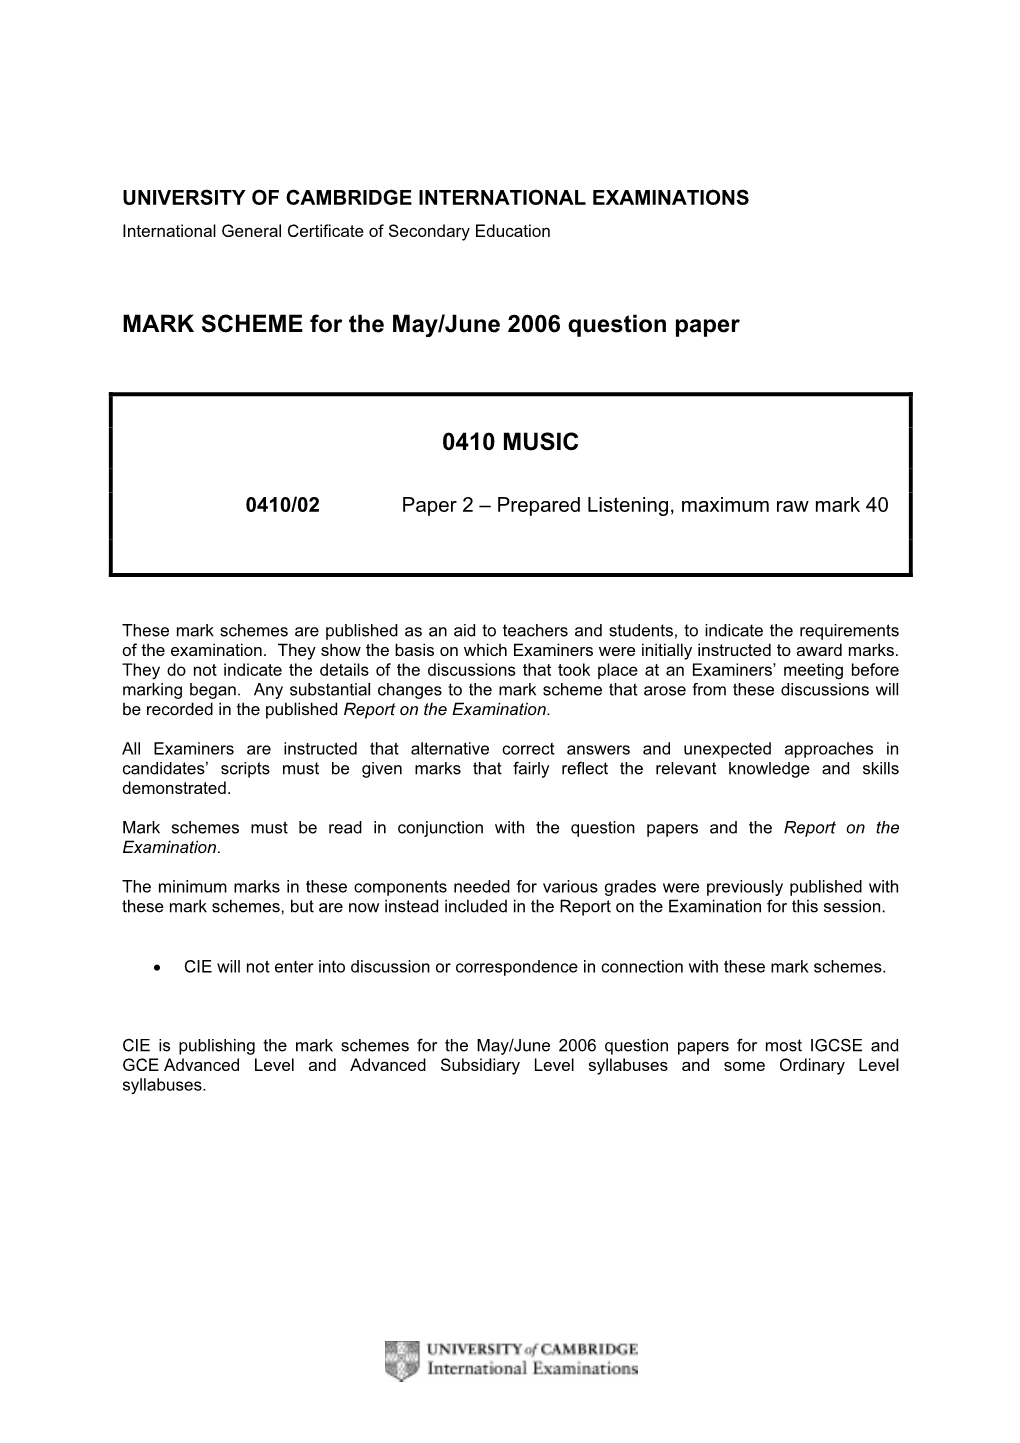 MARK SCHEME for the May/June 2006 Question Paper 0410 MUSIC